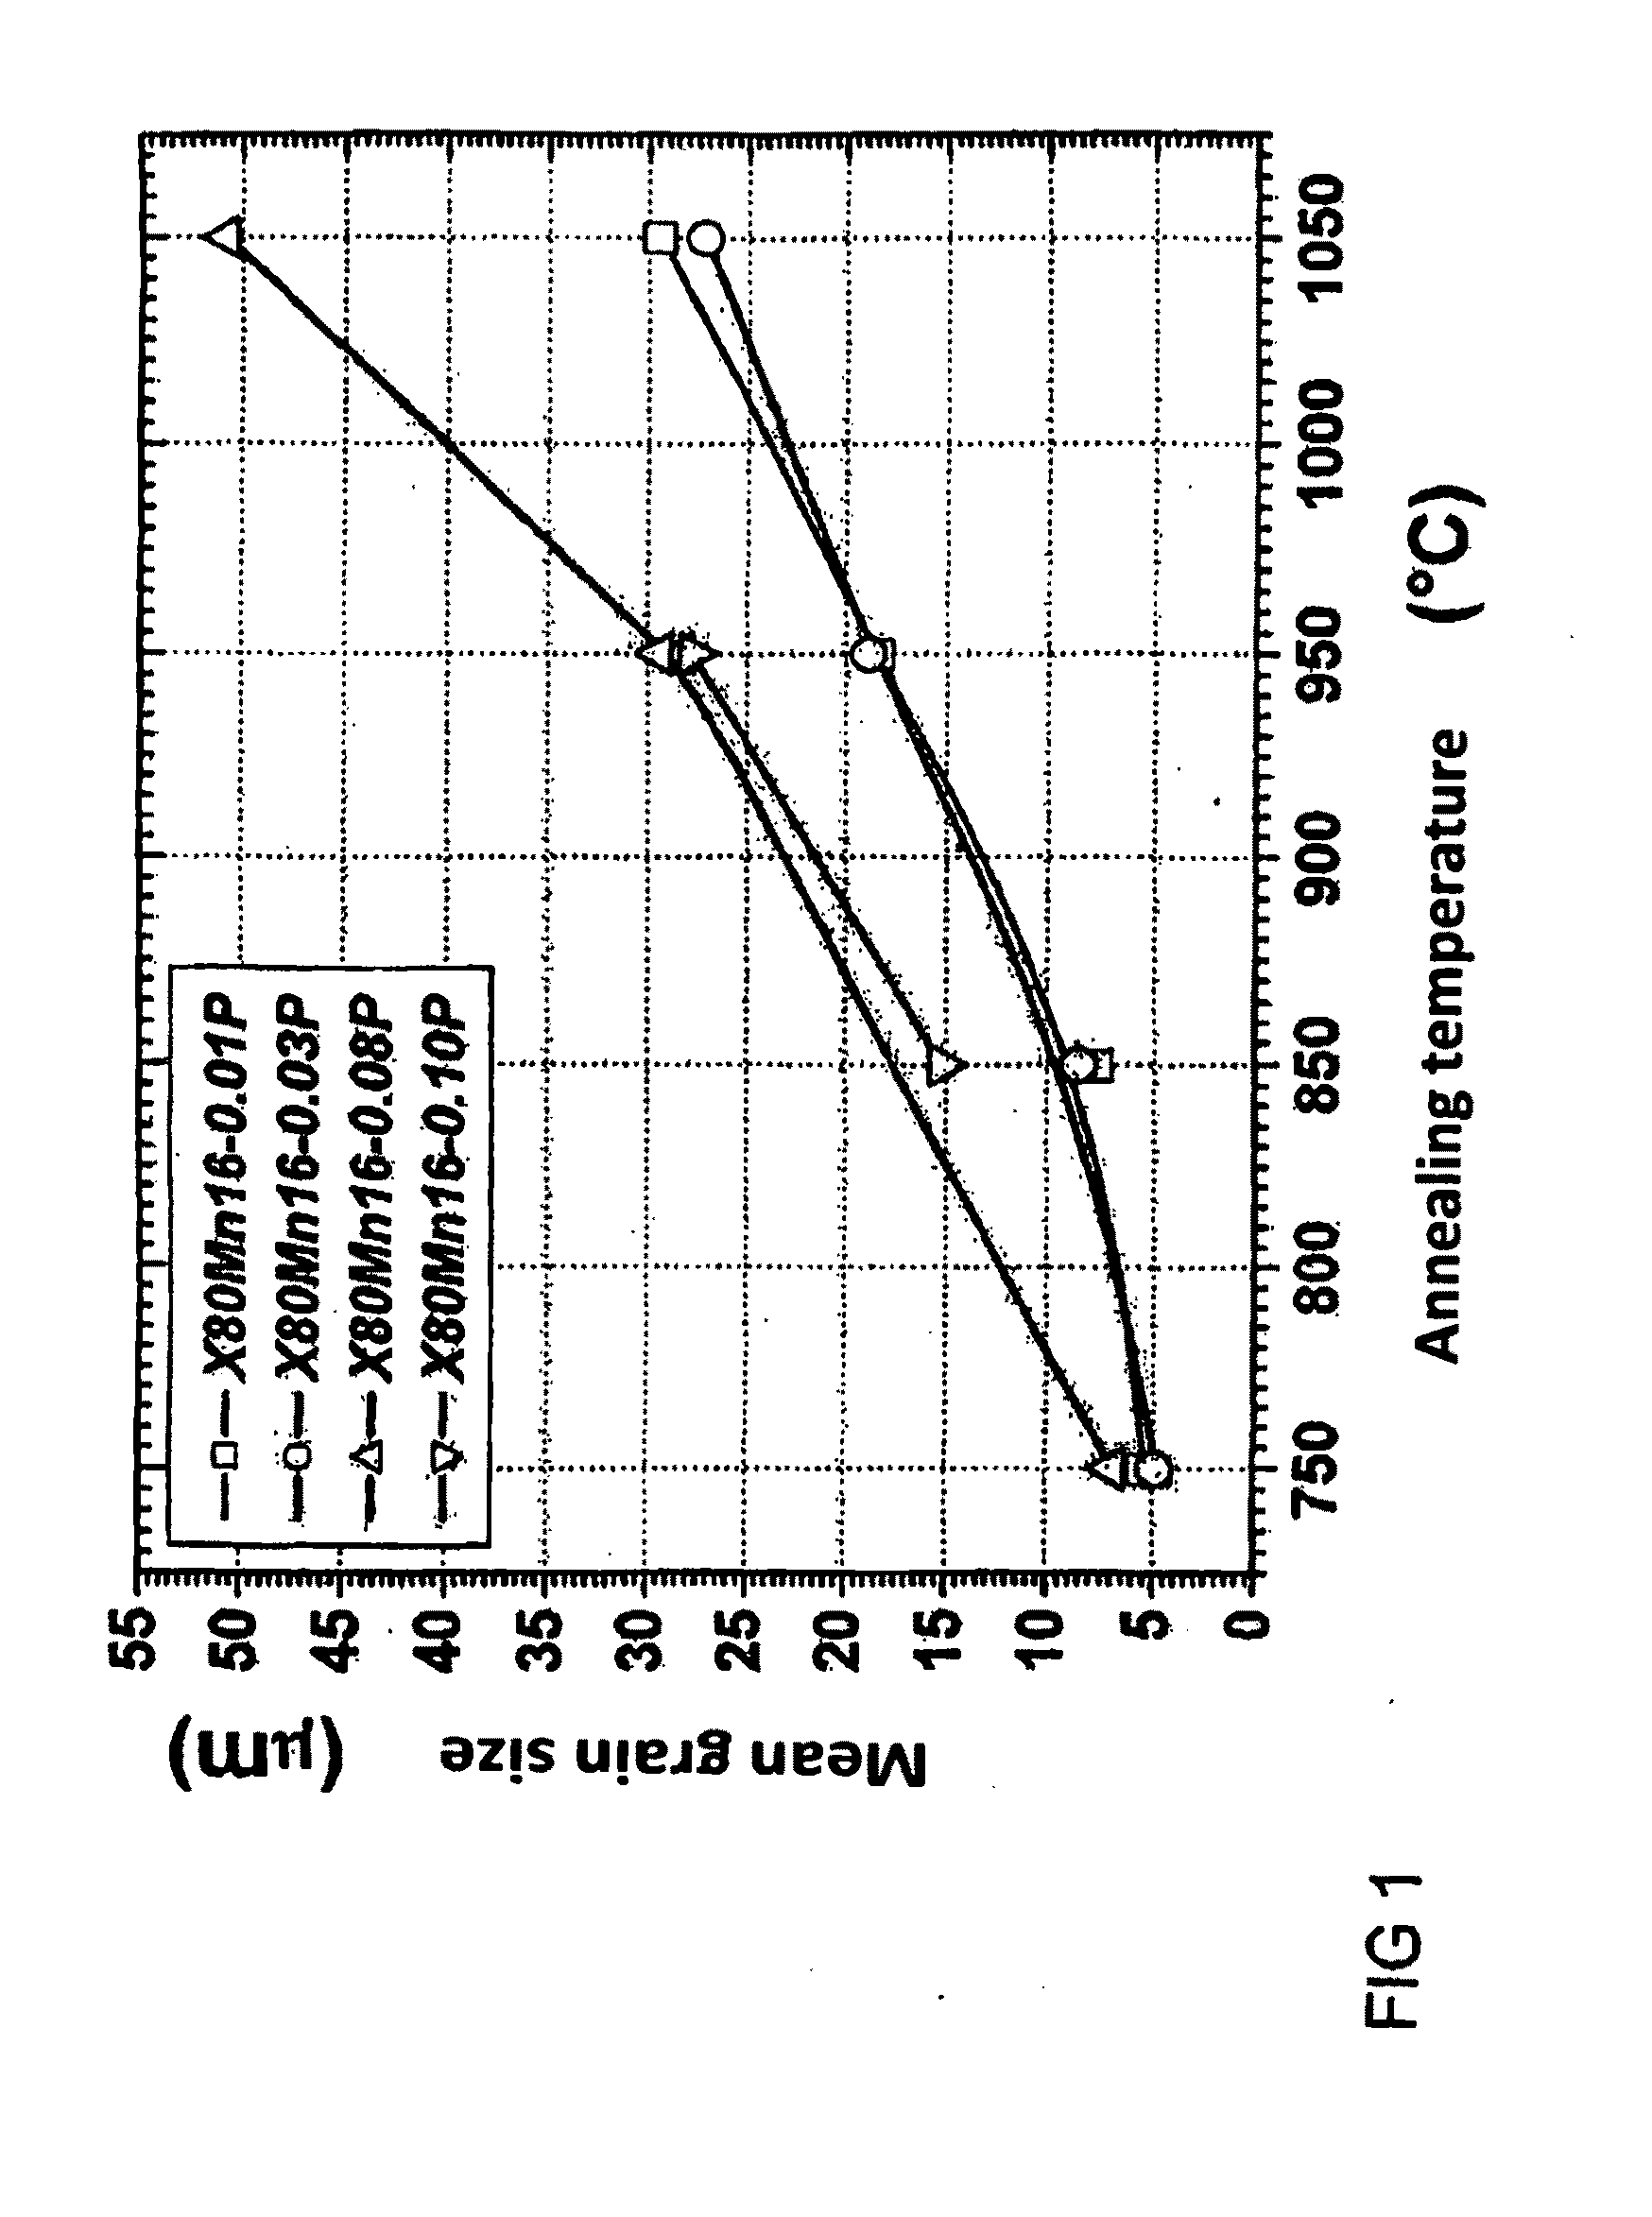 Manganese steel strip having an increased phosphorous content and process for producing the same